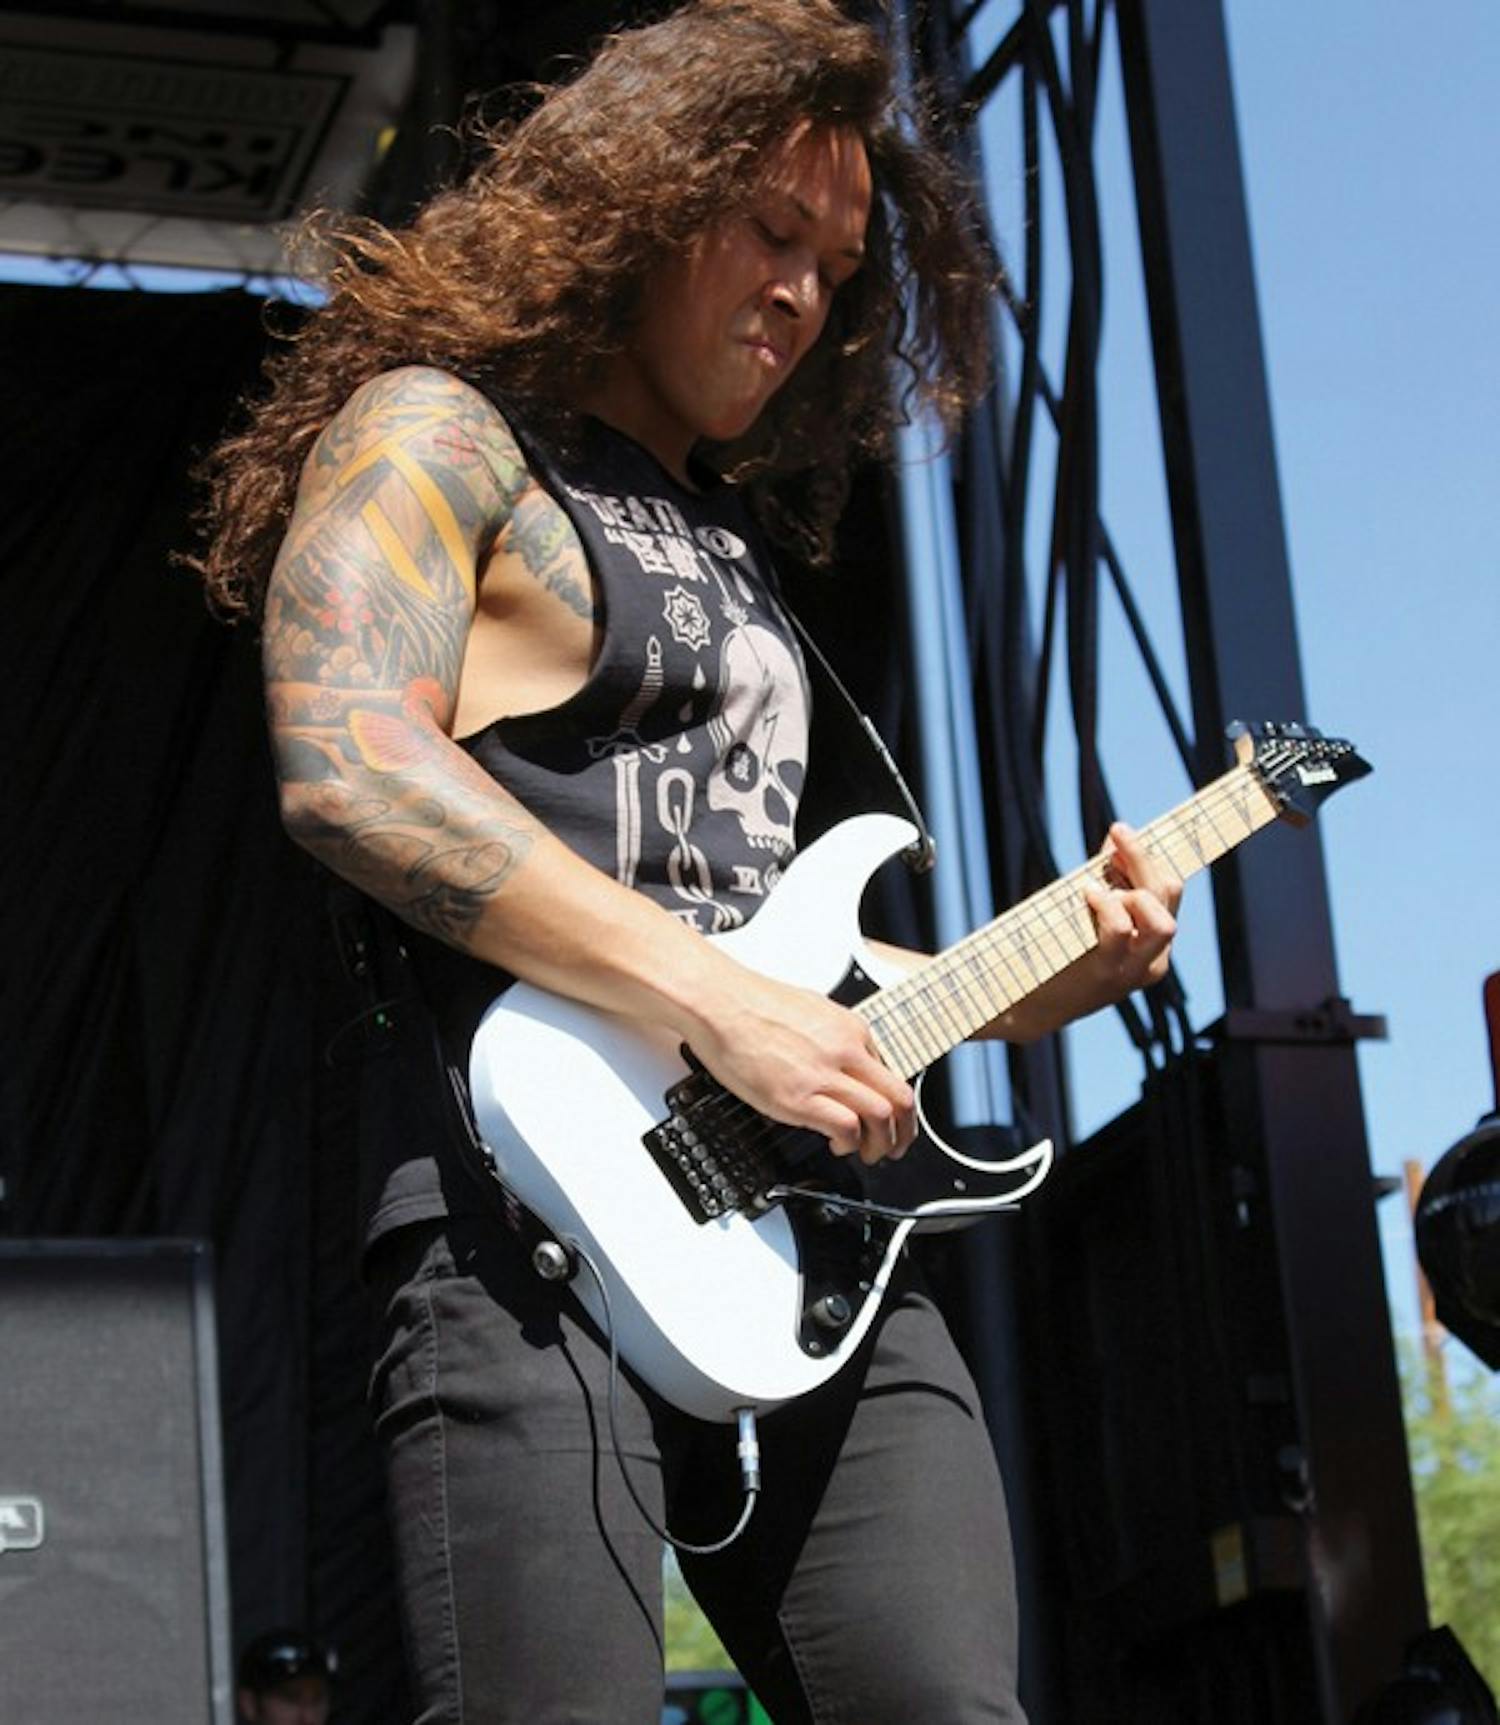 Nick Hippa of As I Lay Dying  strums metalcore guitar riffs at the Rockstar Energy Mayhem Festival on July 6. (Photo by Michelle Tabatabai-Shahab)